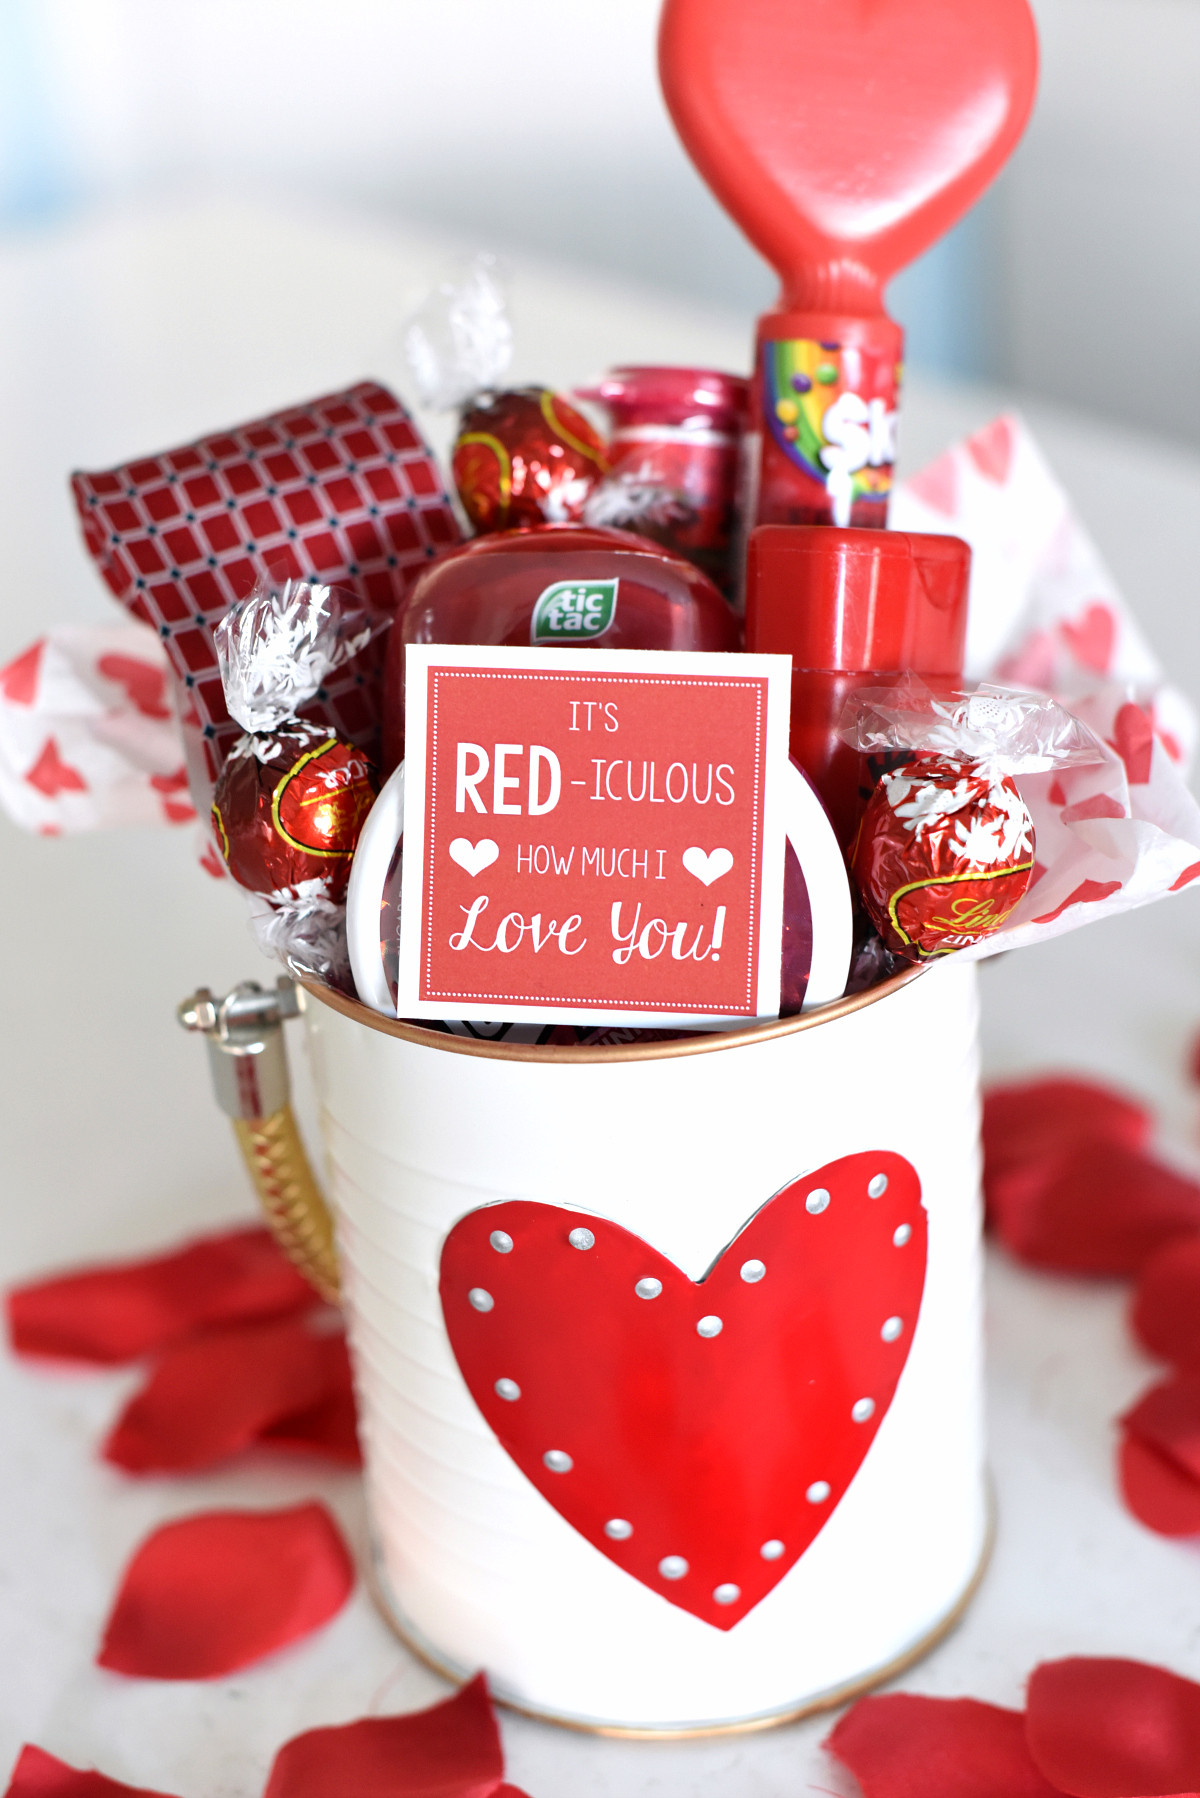 Top Valentines Day Gifts
 Cute Valentine s Day Gift Idea RED iculous Basket